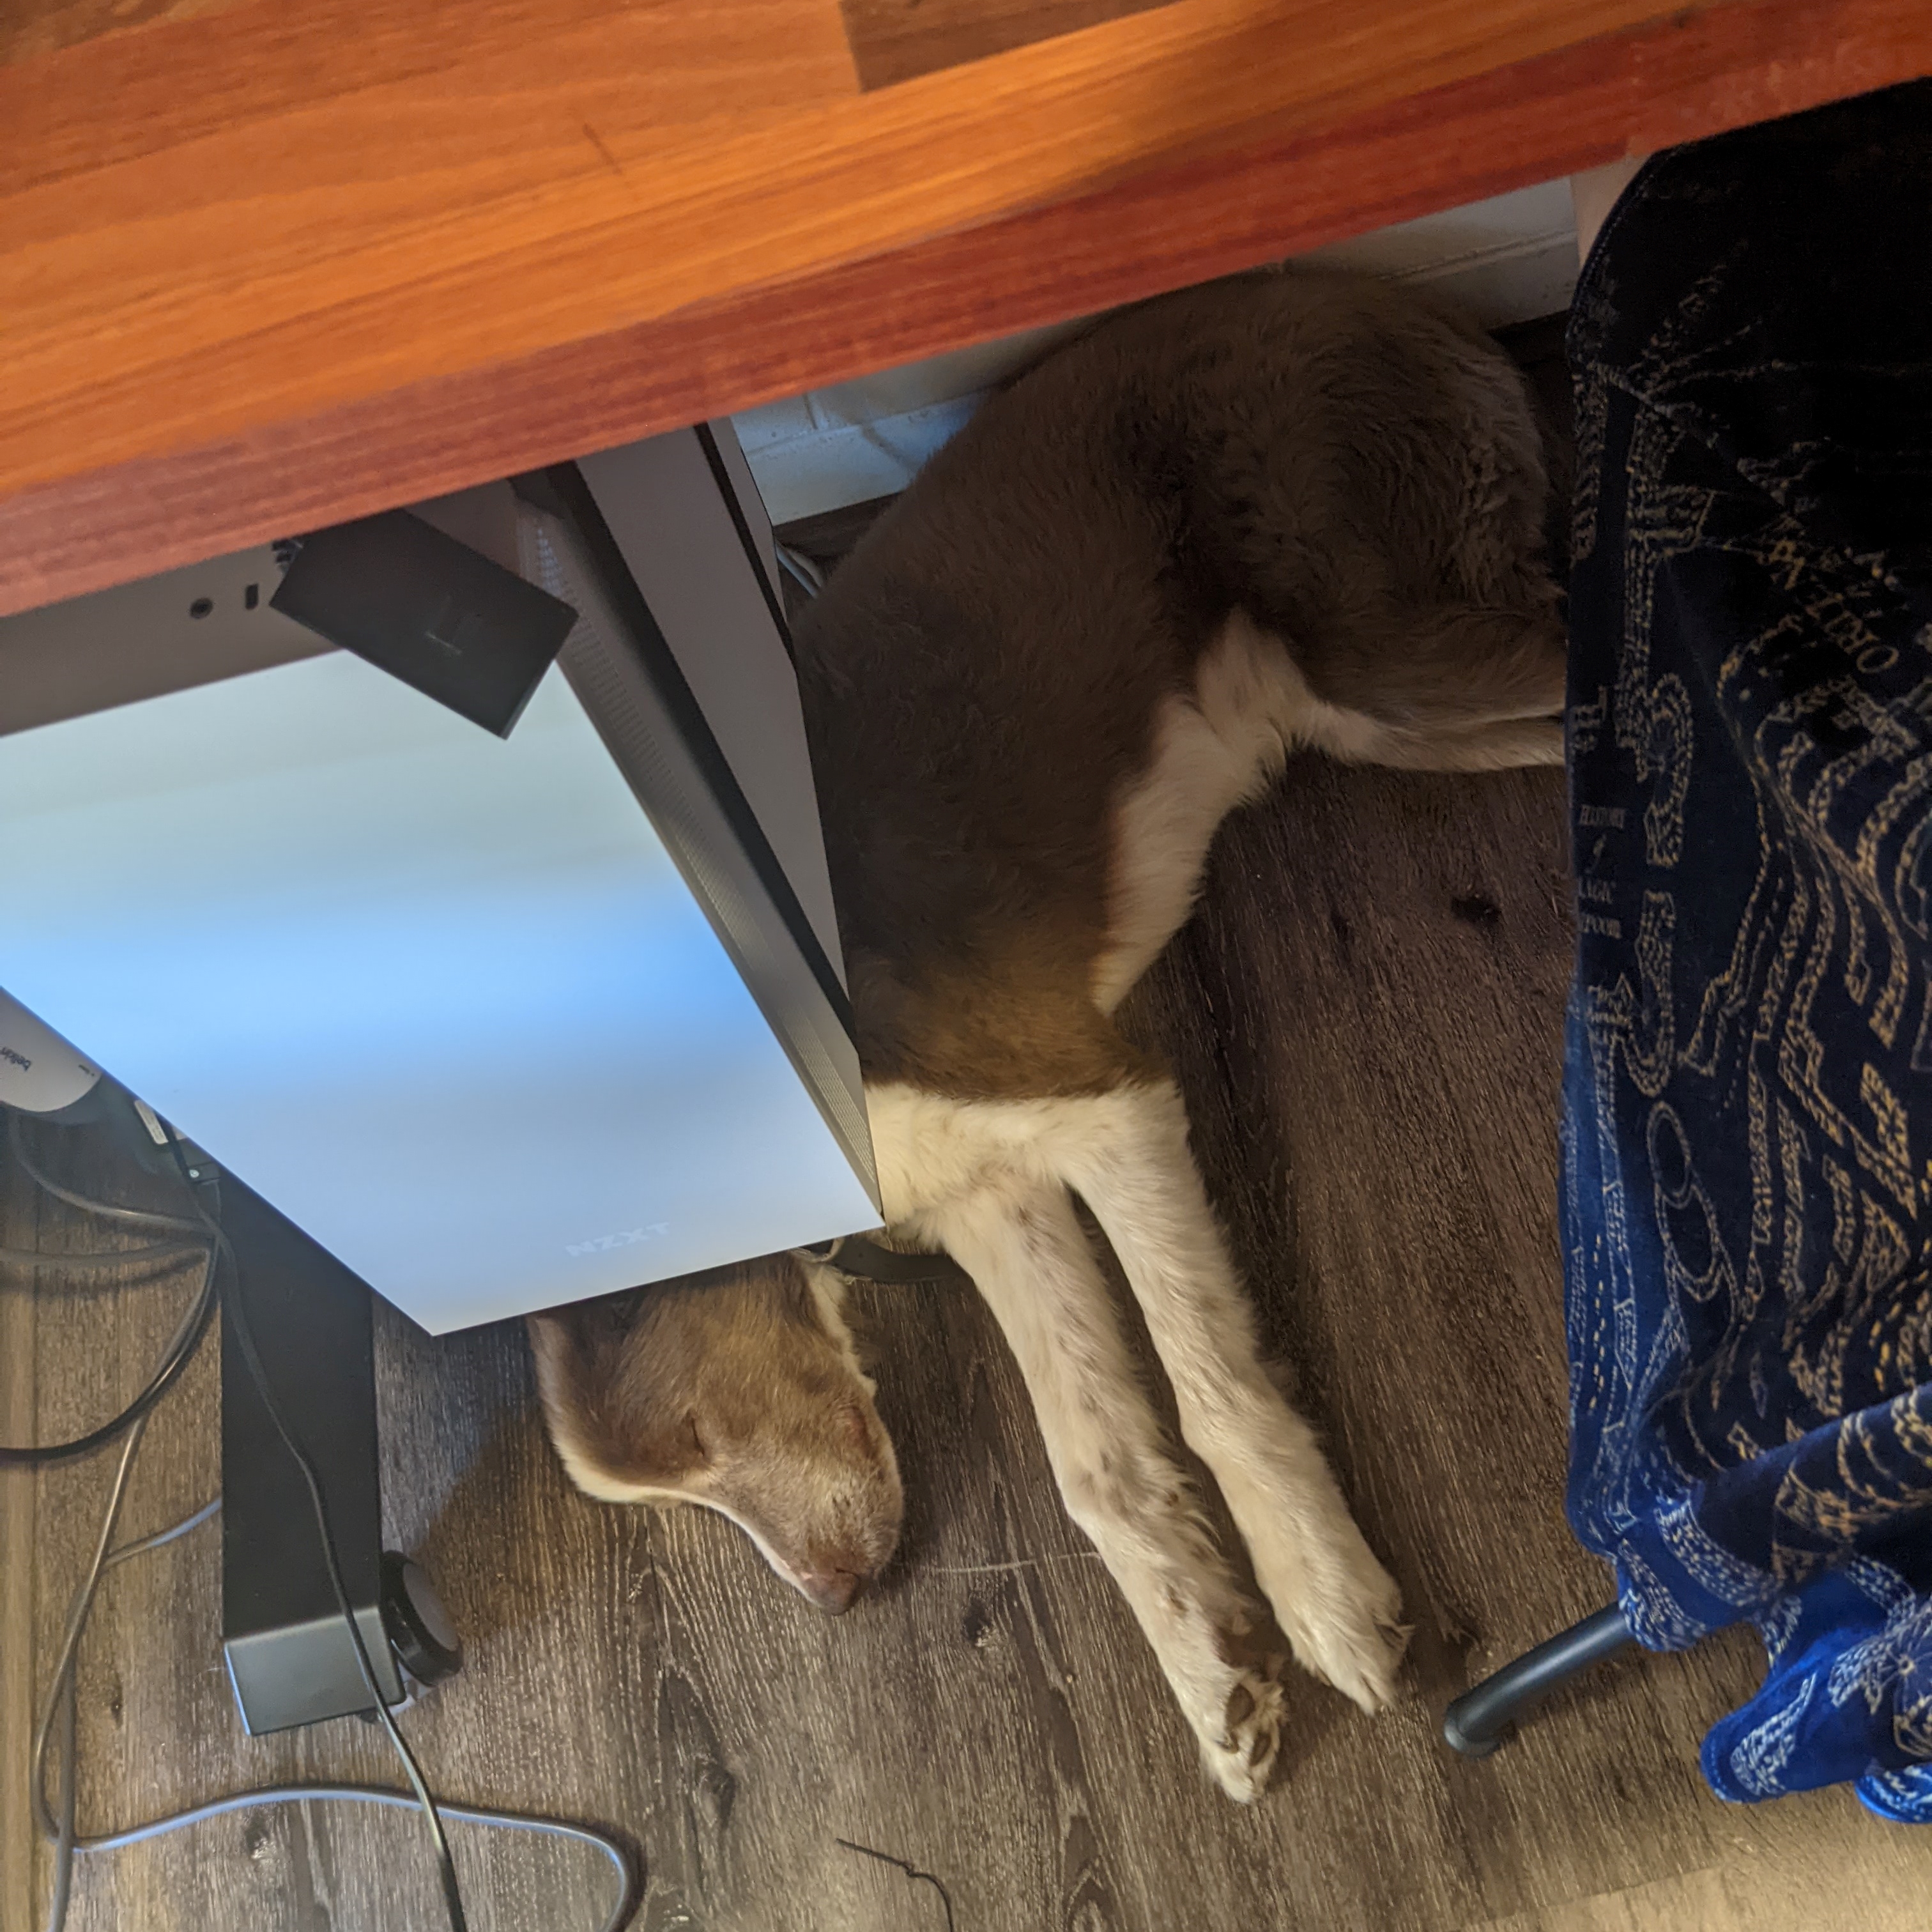 A grey and white border collie asleep under the desk underneath the mounted desktop computer